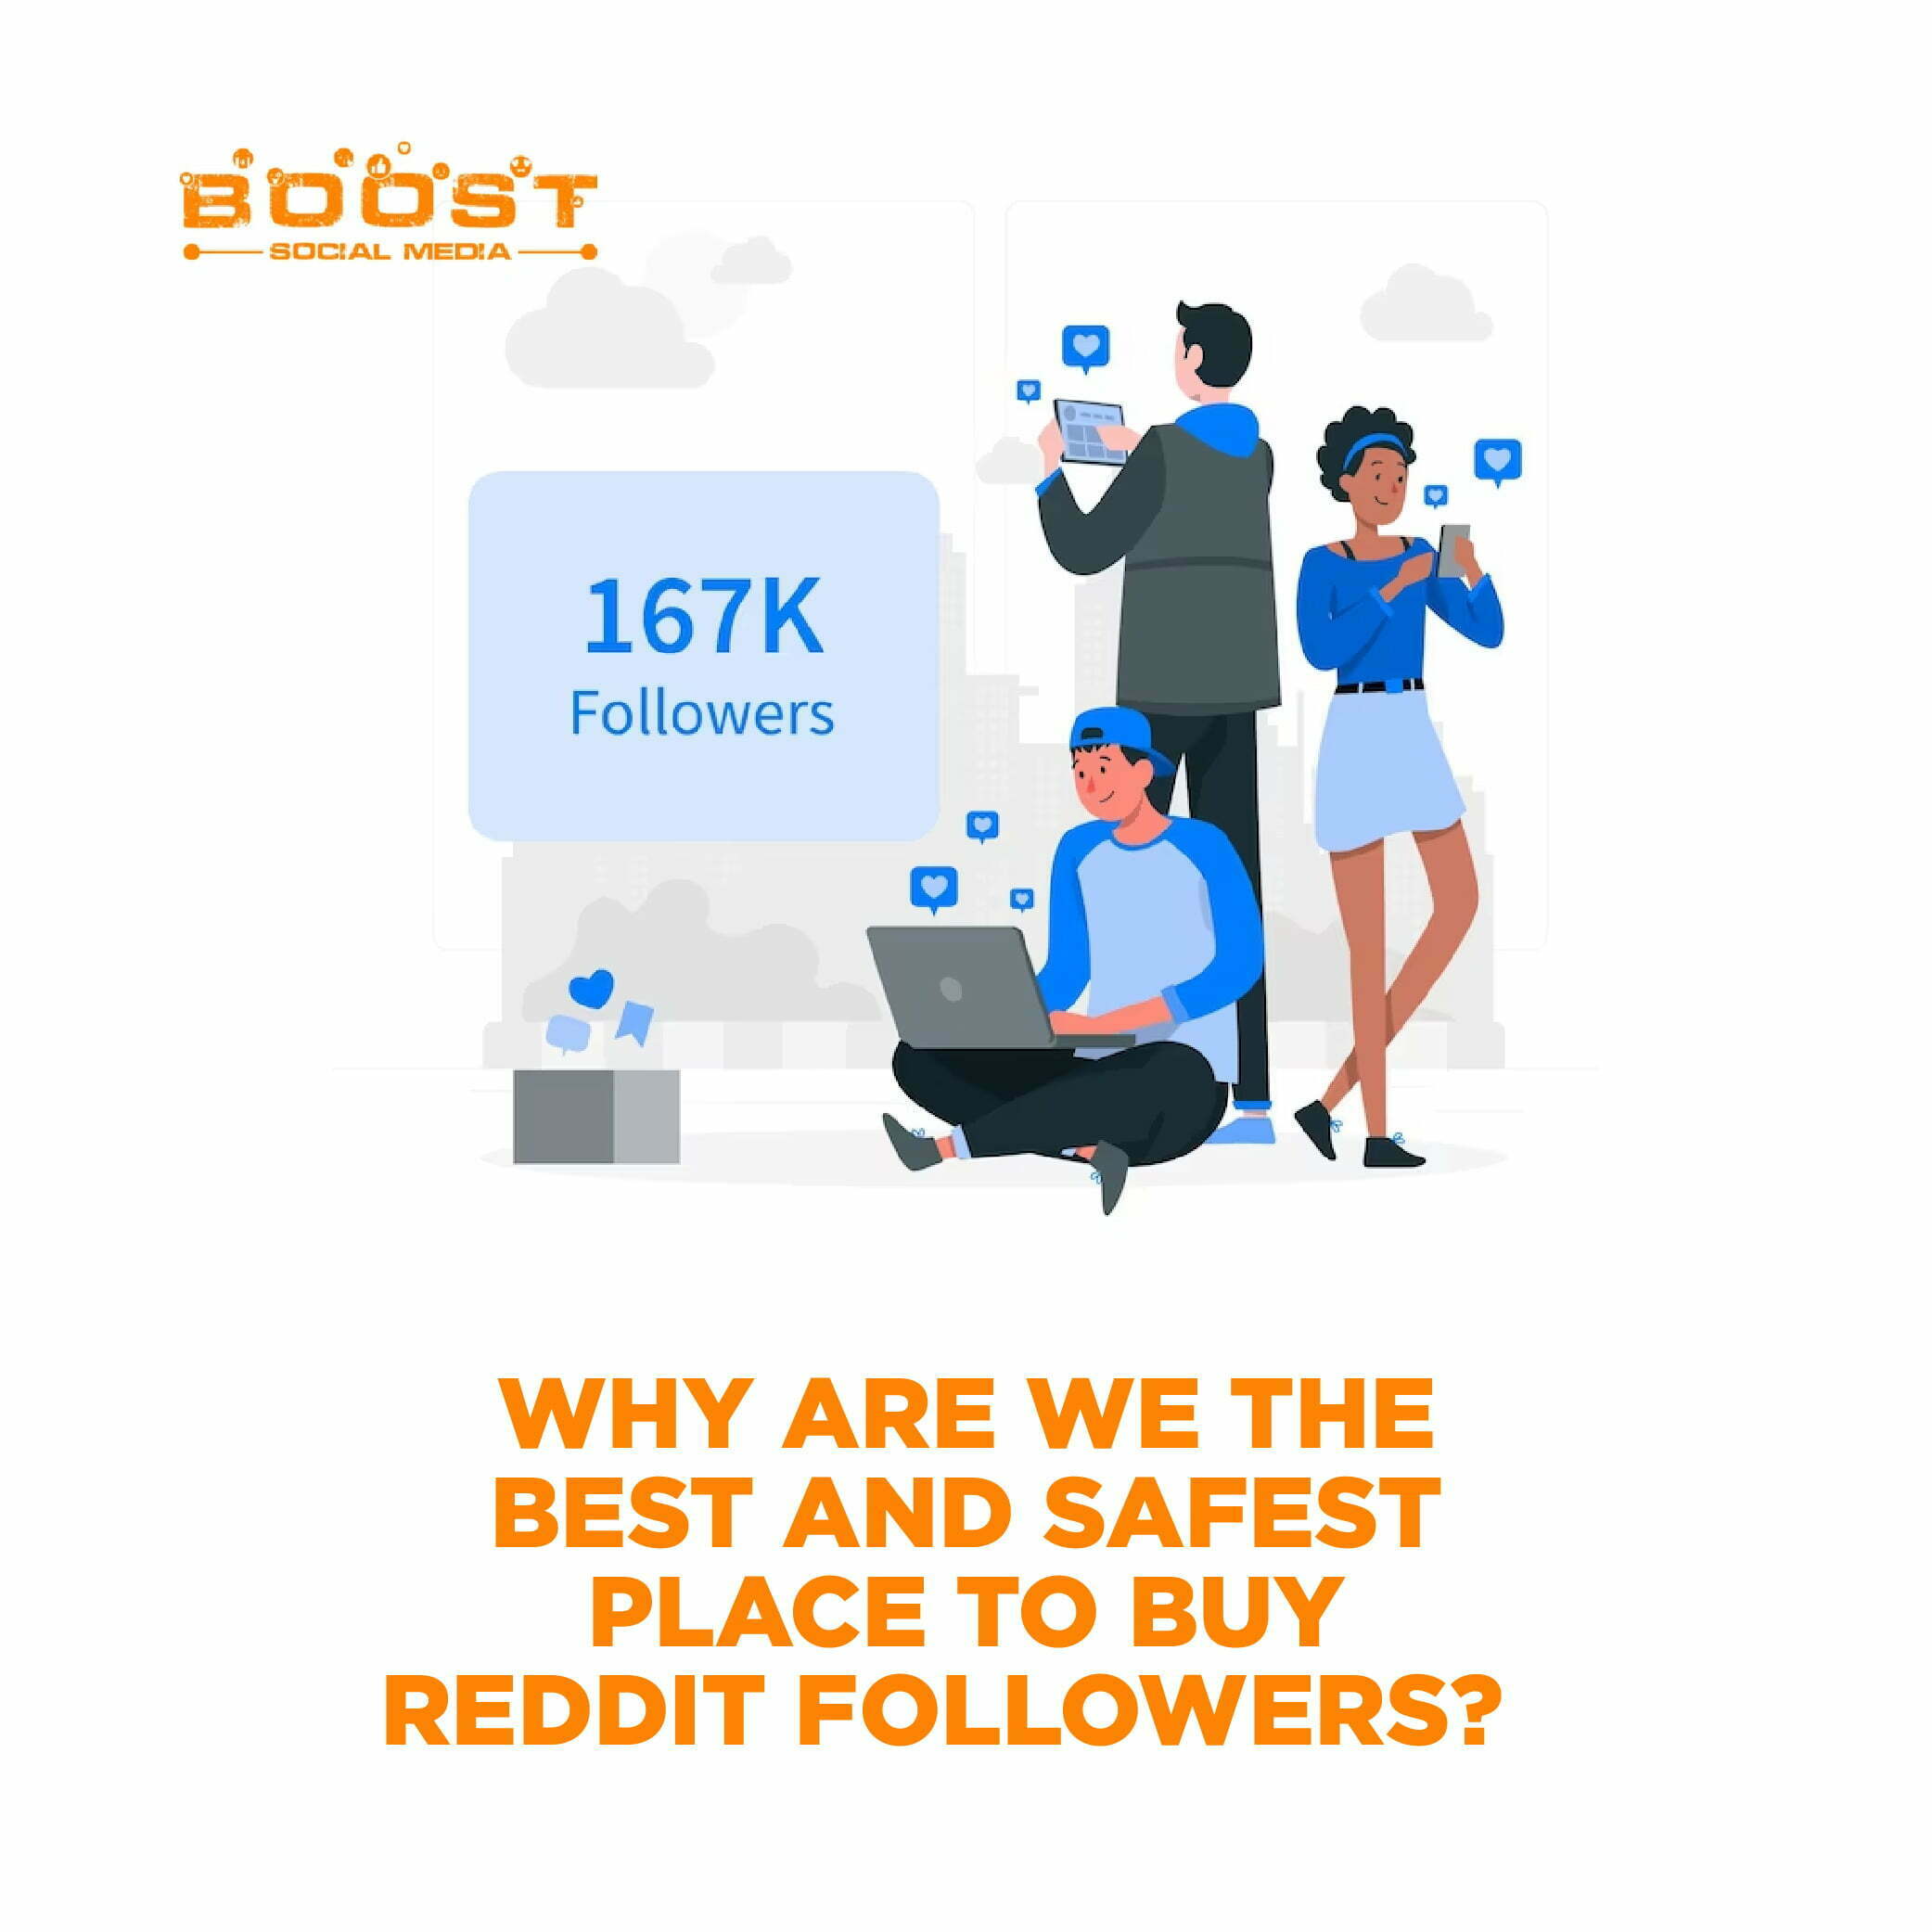 Why are we the best and safest place to buy Reddit Followers